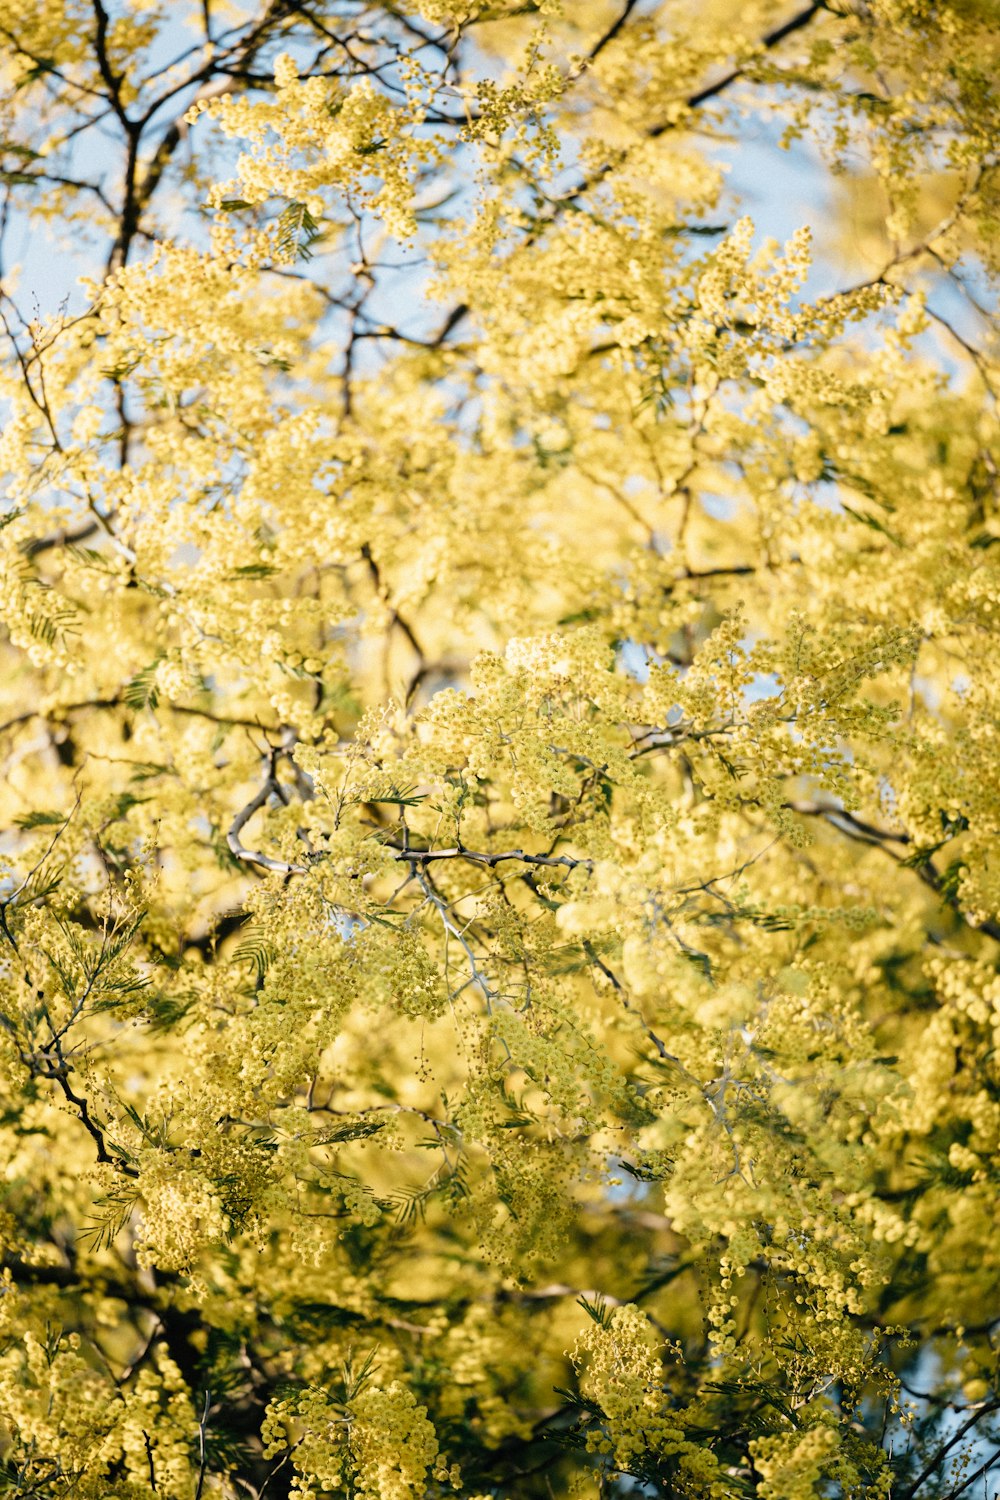 a tree with yellow flowers in the foreground and a blue sky in the background